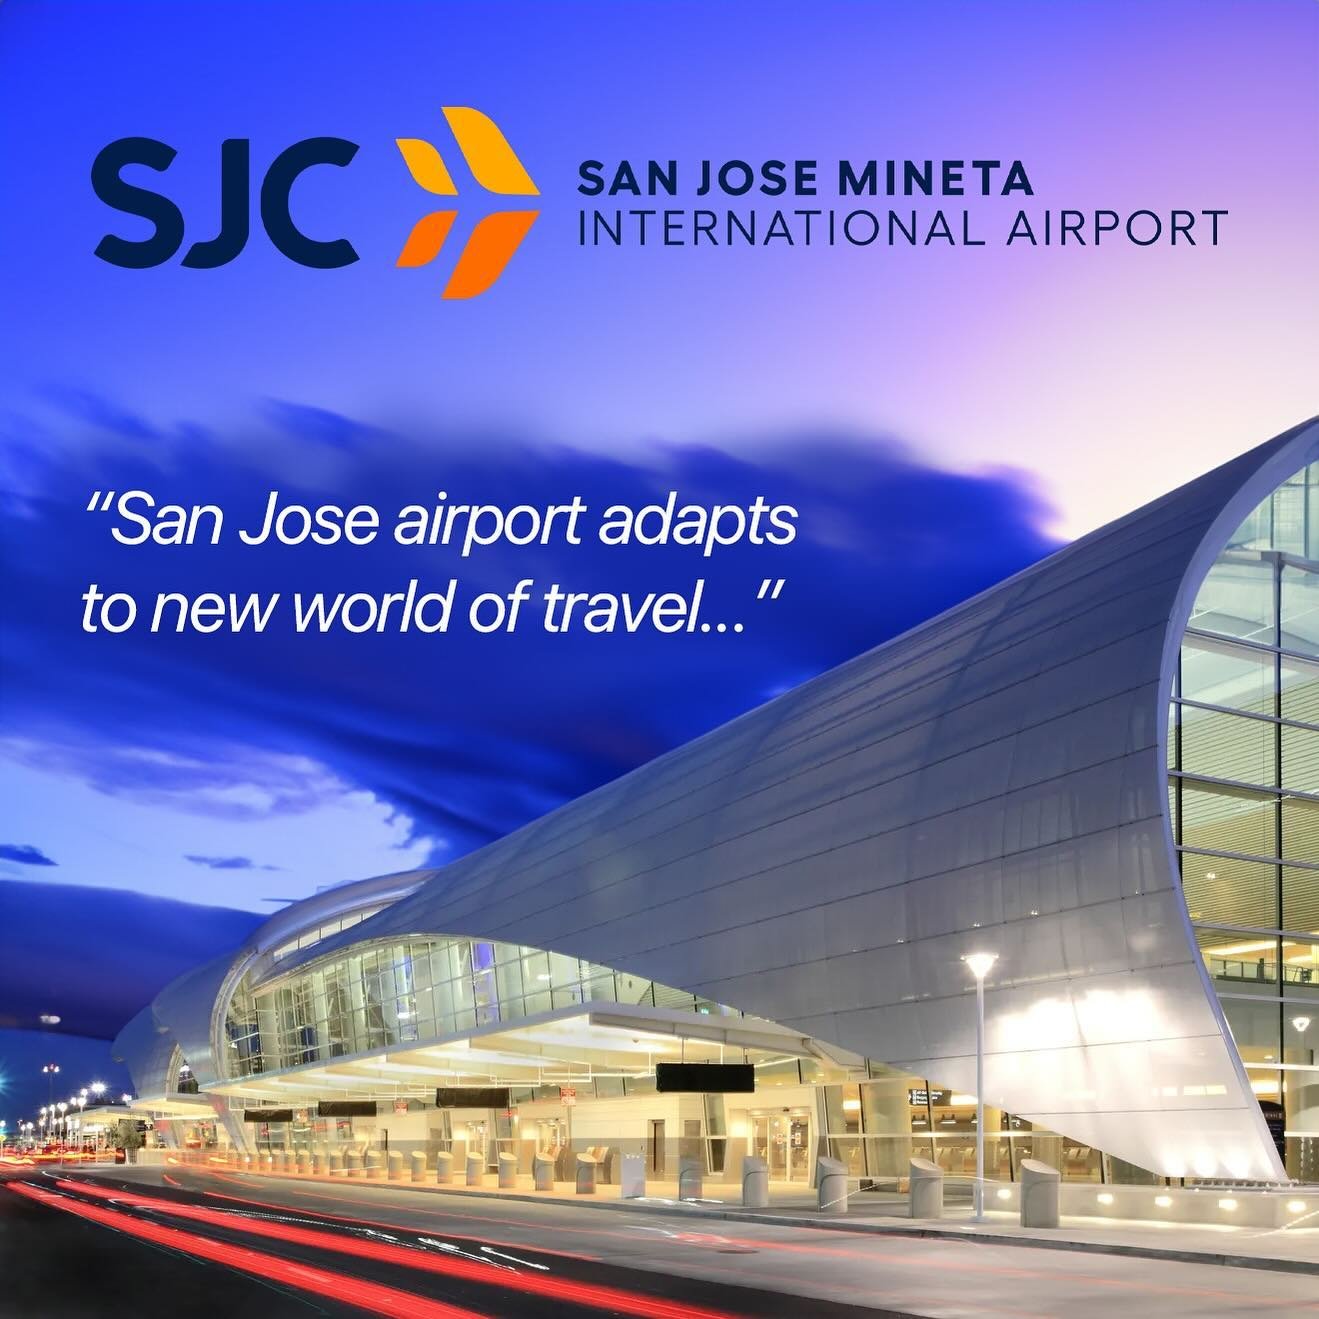 &ldquo;Certain routes that rely heavily on business travelers have not recovered and some no longer exist in San Jose, but the airport is doing all it can to attract (airlines) to key destinations and continued growth,&rdquo; San Jose Councilmember a